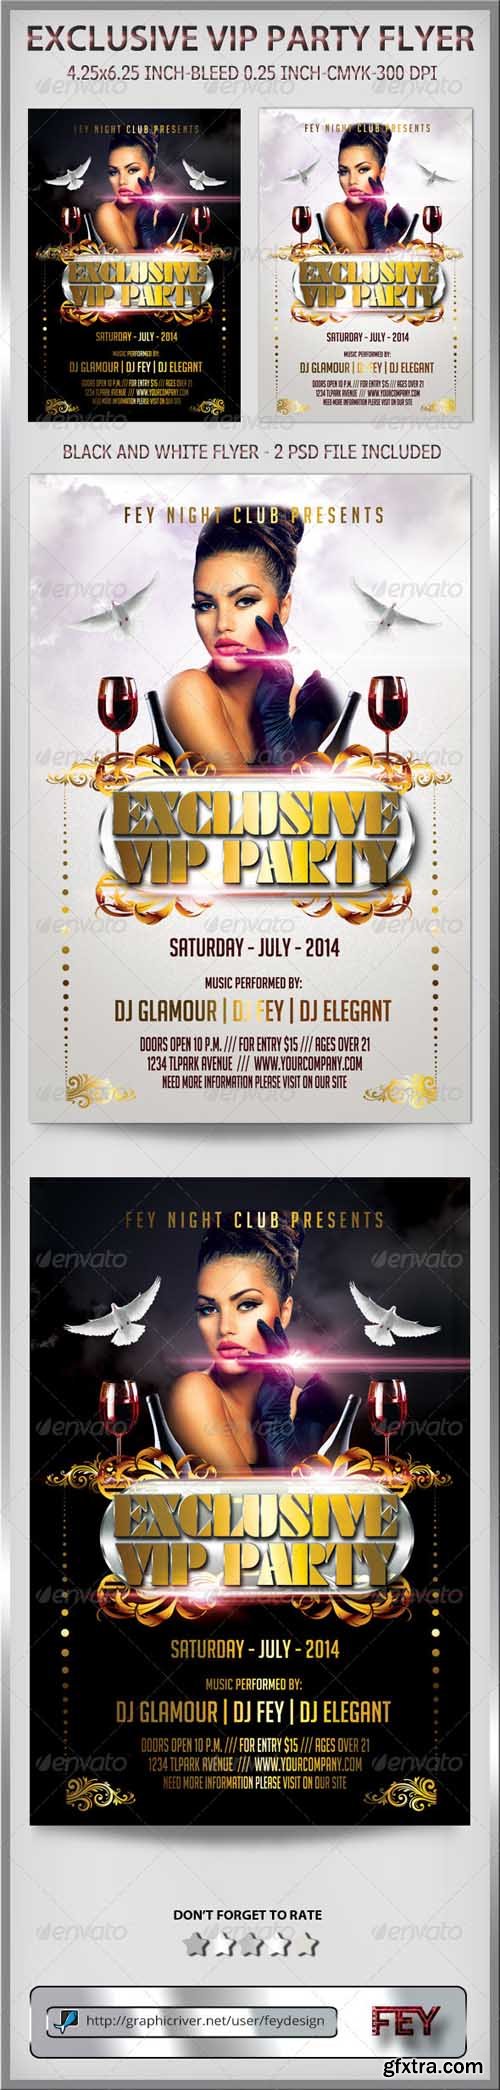 GR - Exclusive VIP Party Flyer 8275134